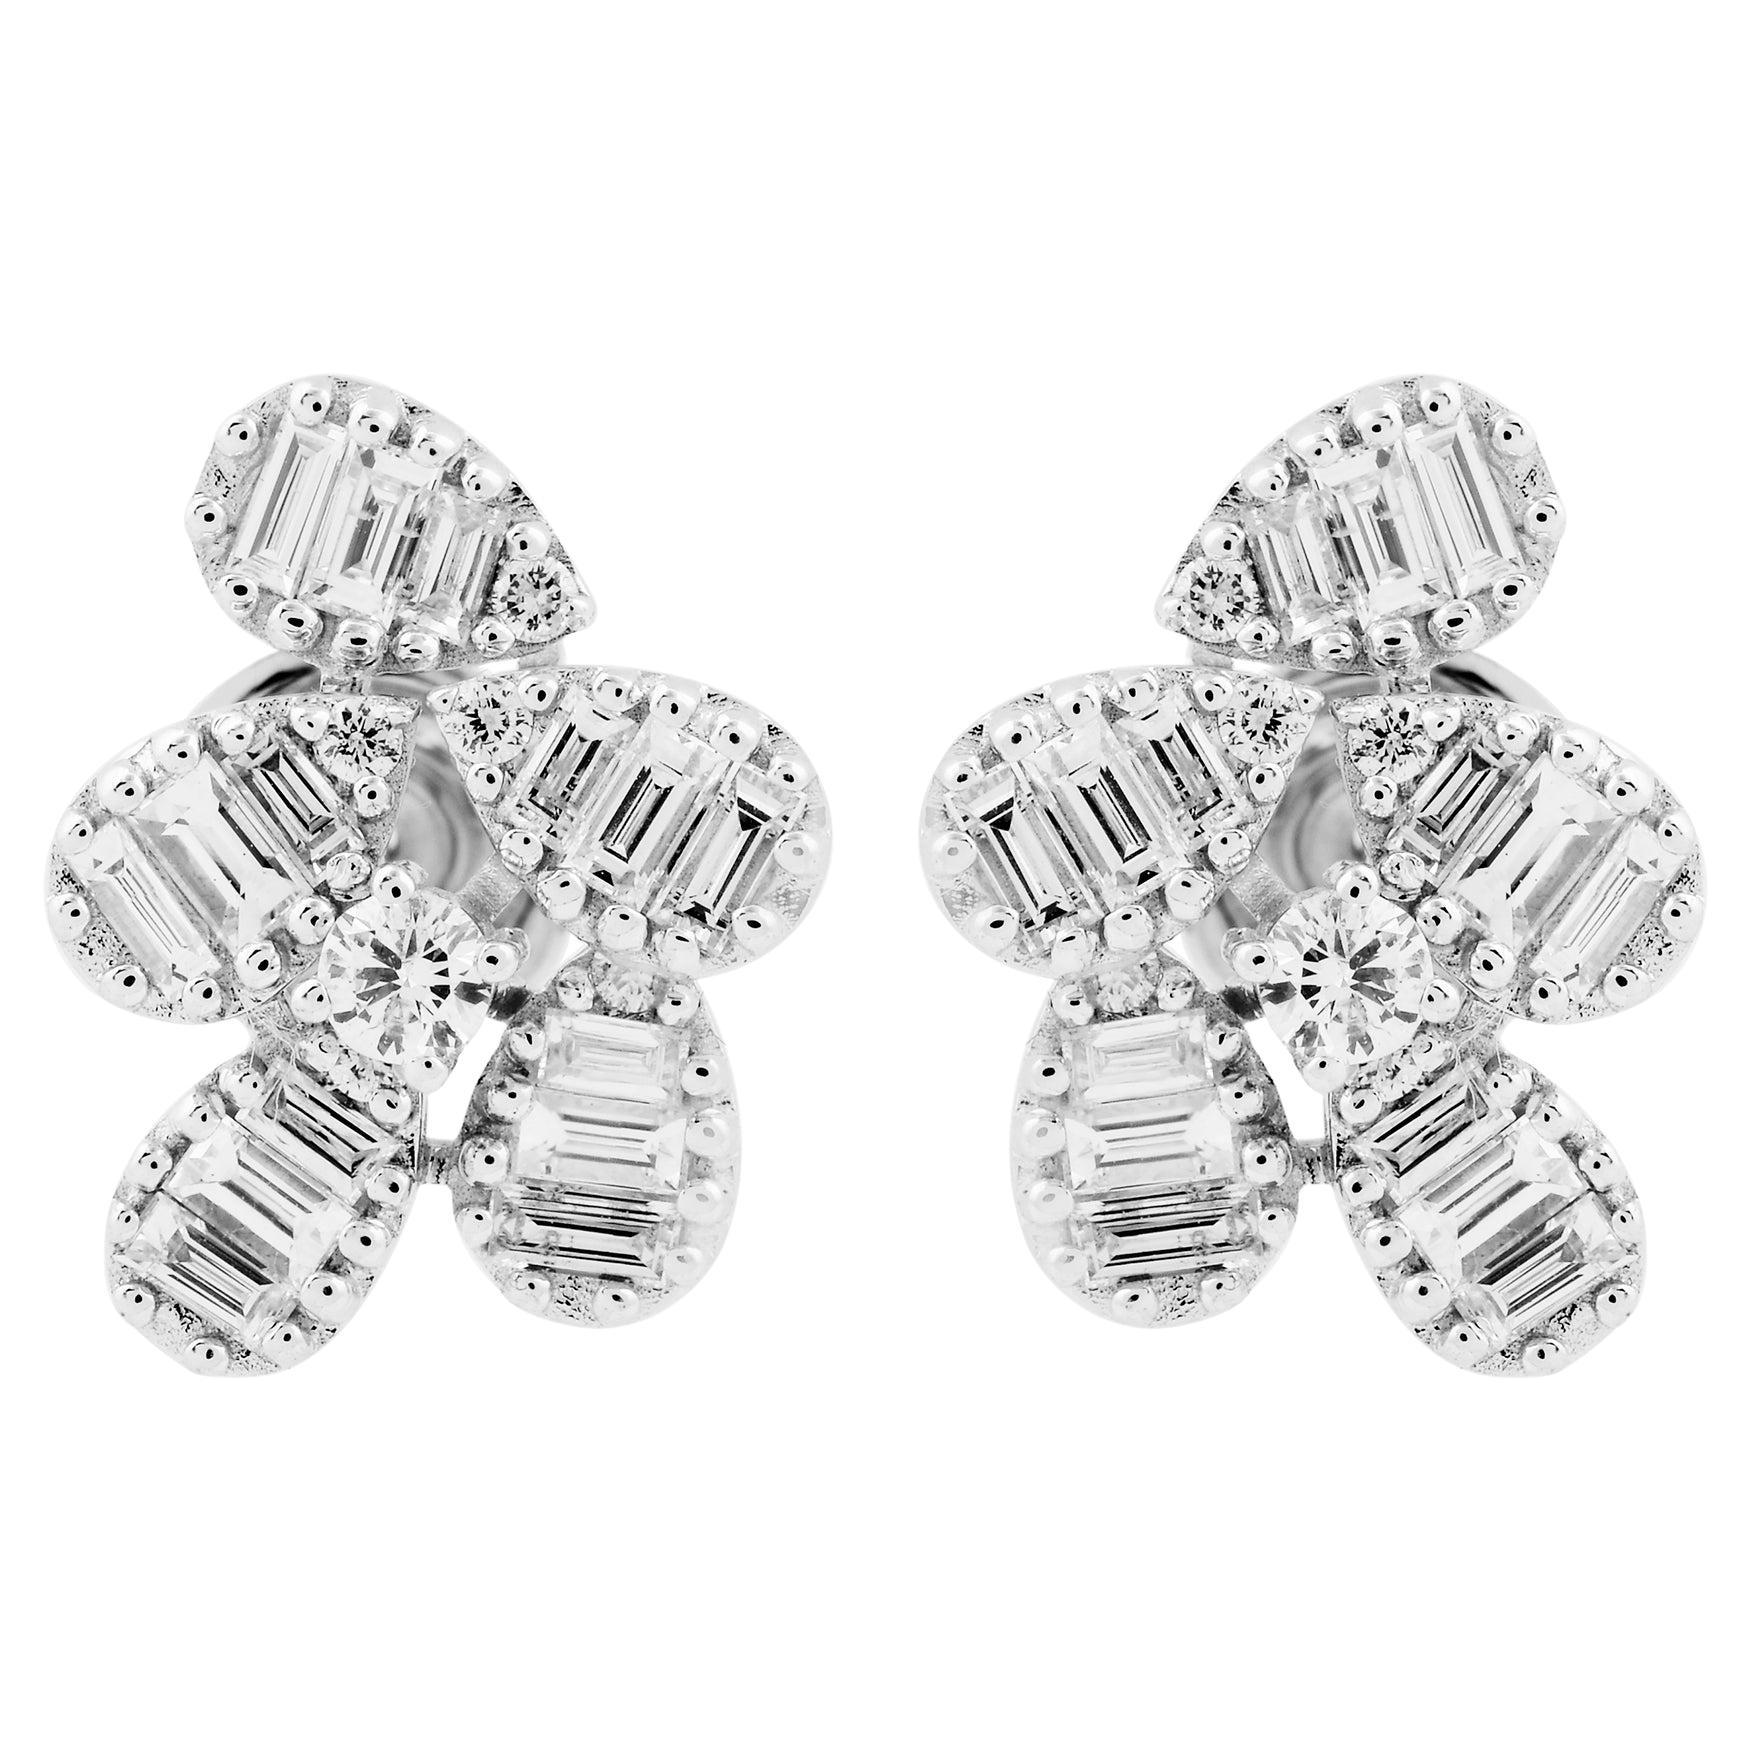 SI Clarity HI Color Baguette Diamond Stud Earrings Solid 14k White Gold Jewelry